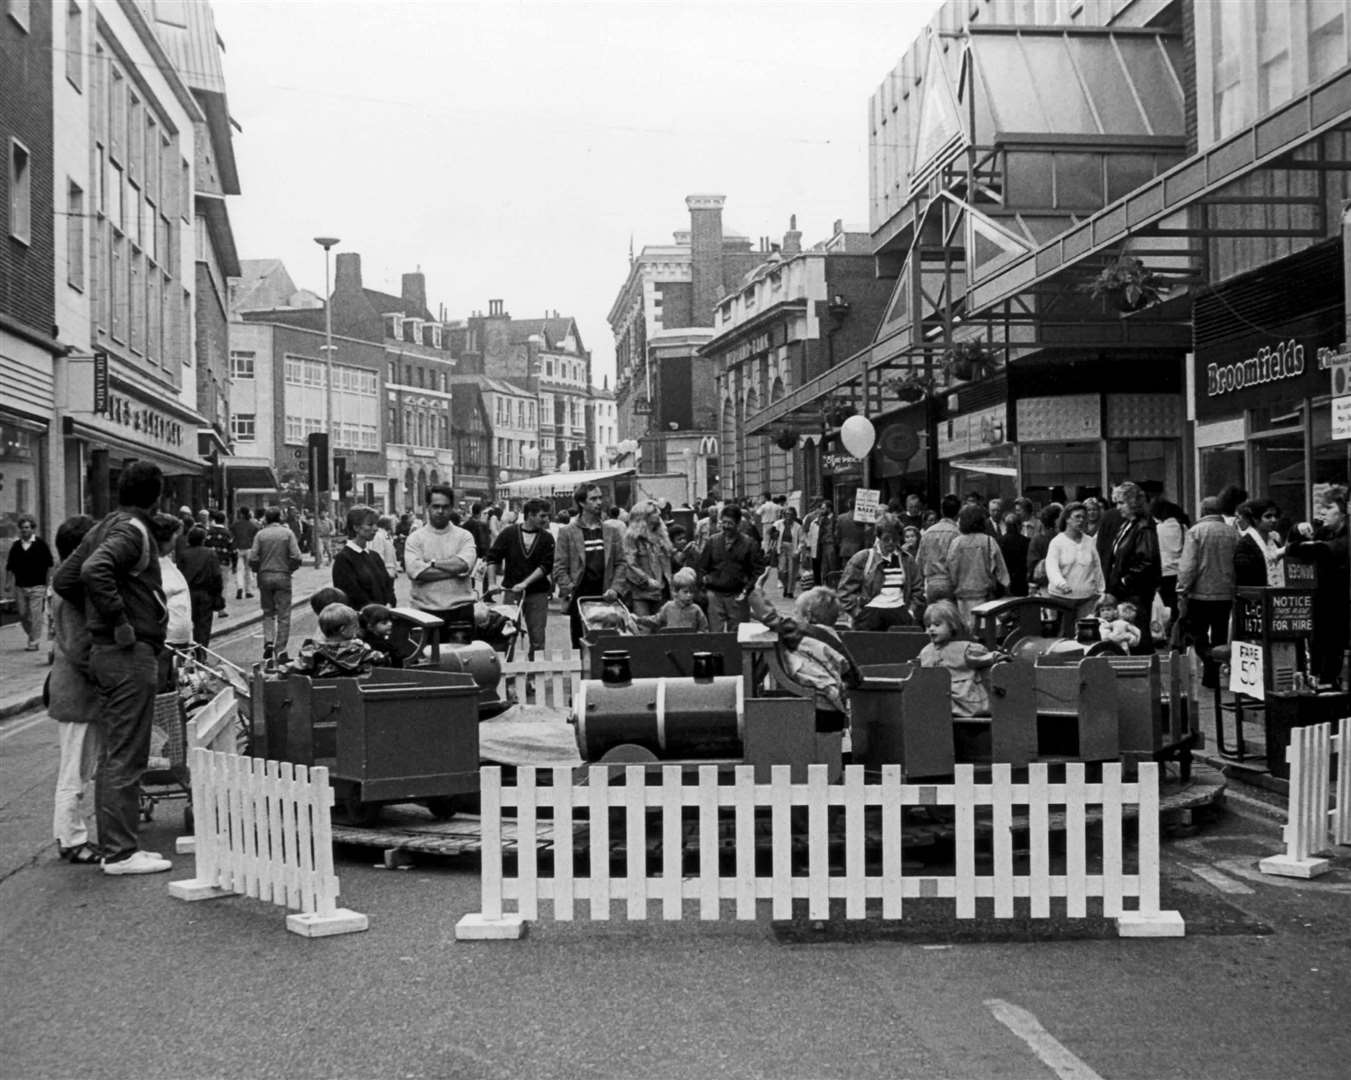 High Street, Gravesend, on October 31, 1990. Broomfields, seen on the right of this picture next to the entrance to the Thamesgate shopping centre in Gravesend, is now a Greggs. Further down, on the other side of the entrance, was an Our Price